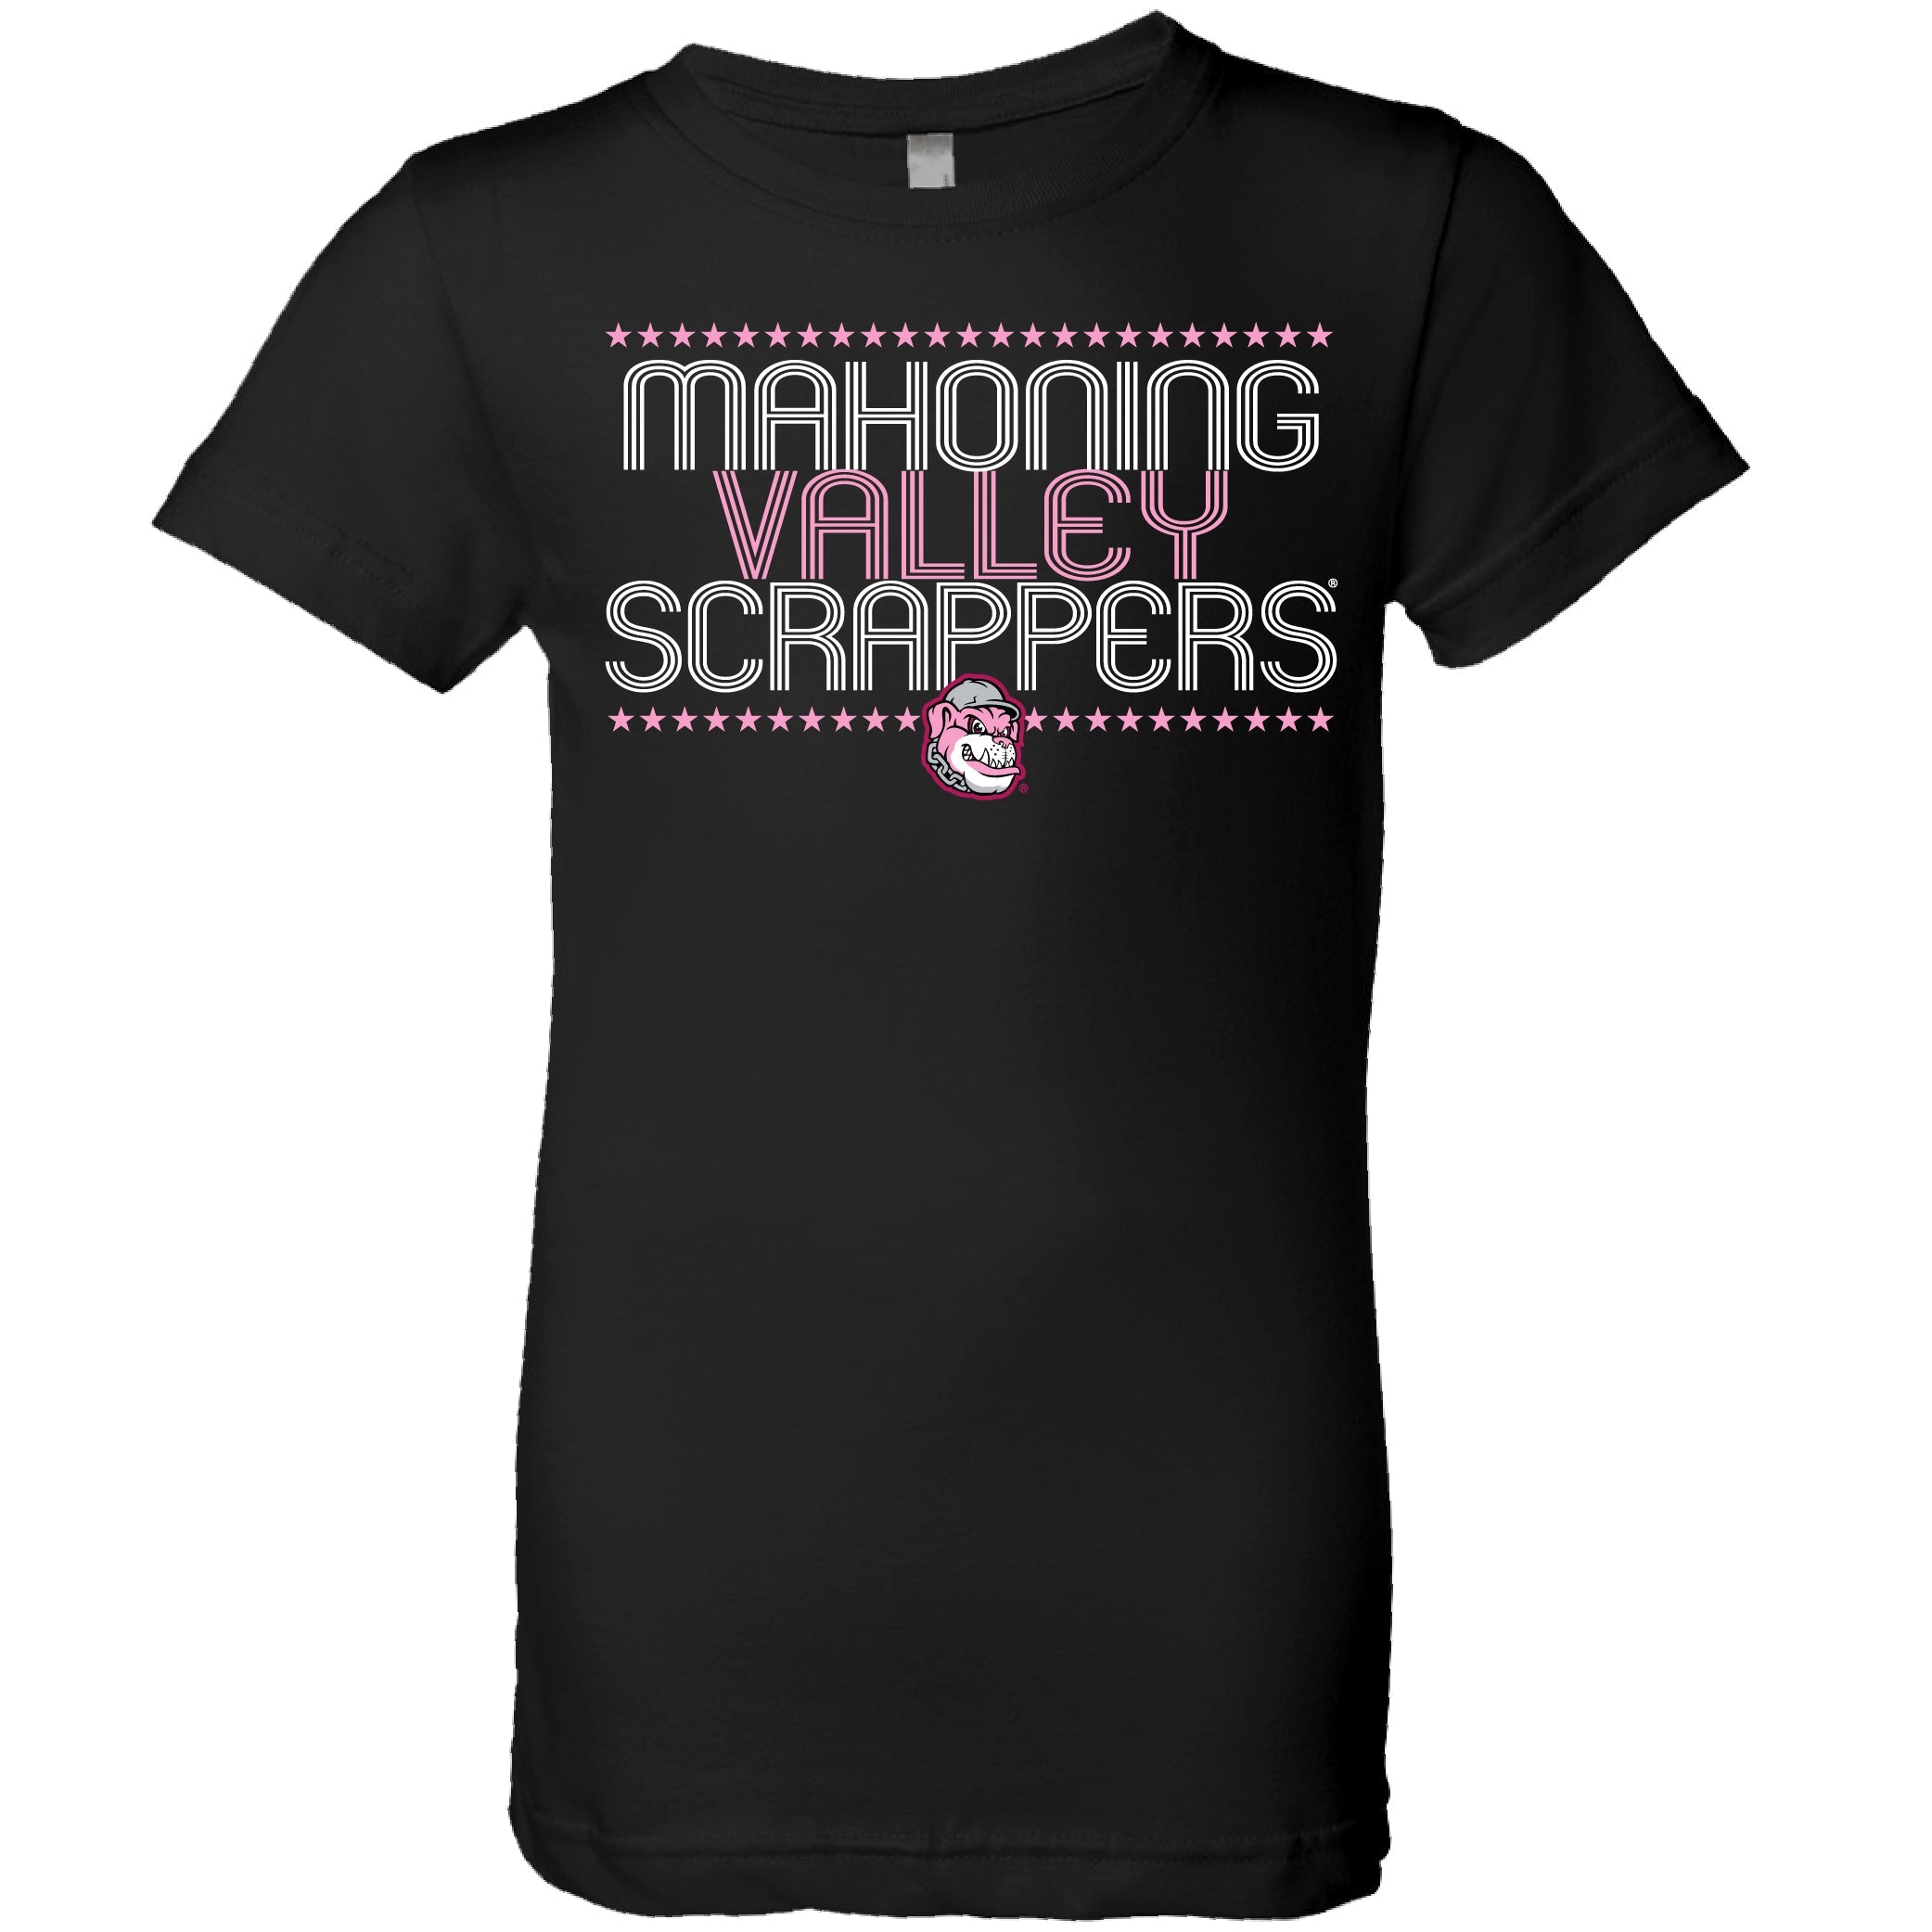 Girl's Black and Pink Princess Scrappers T-Shirt-0